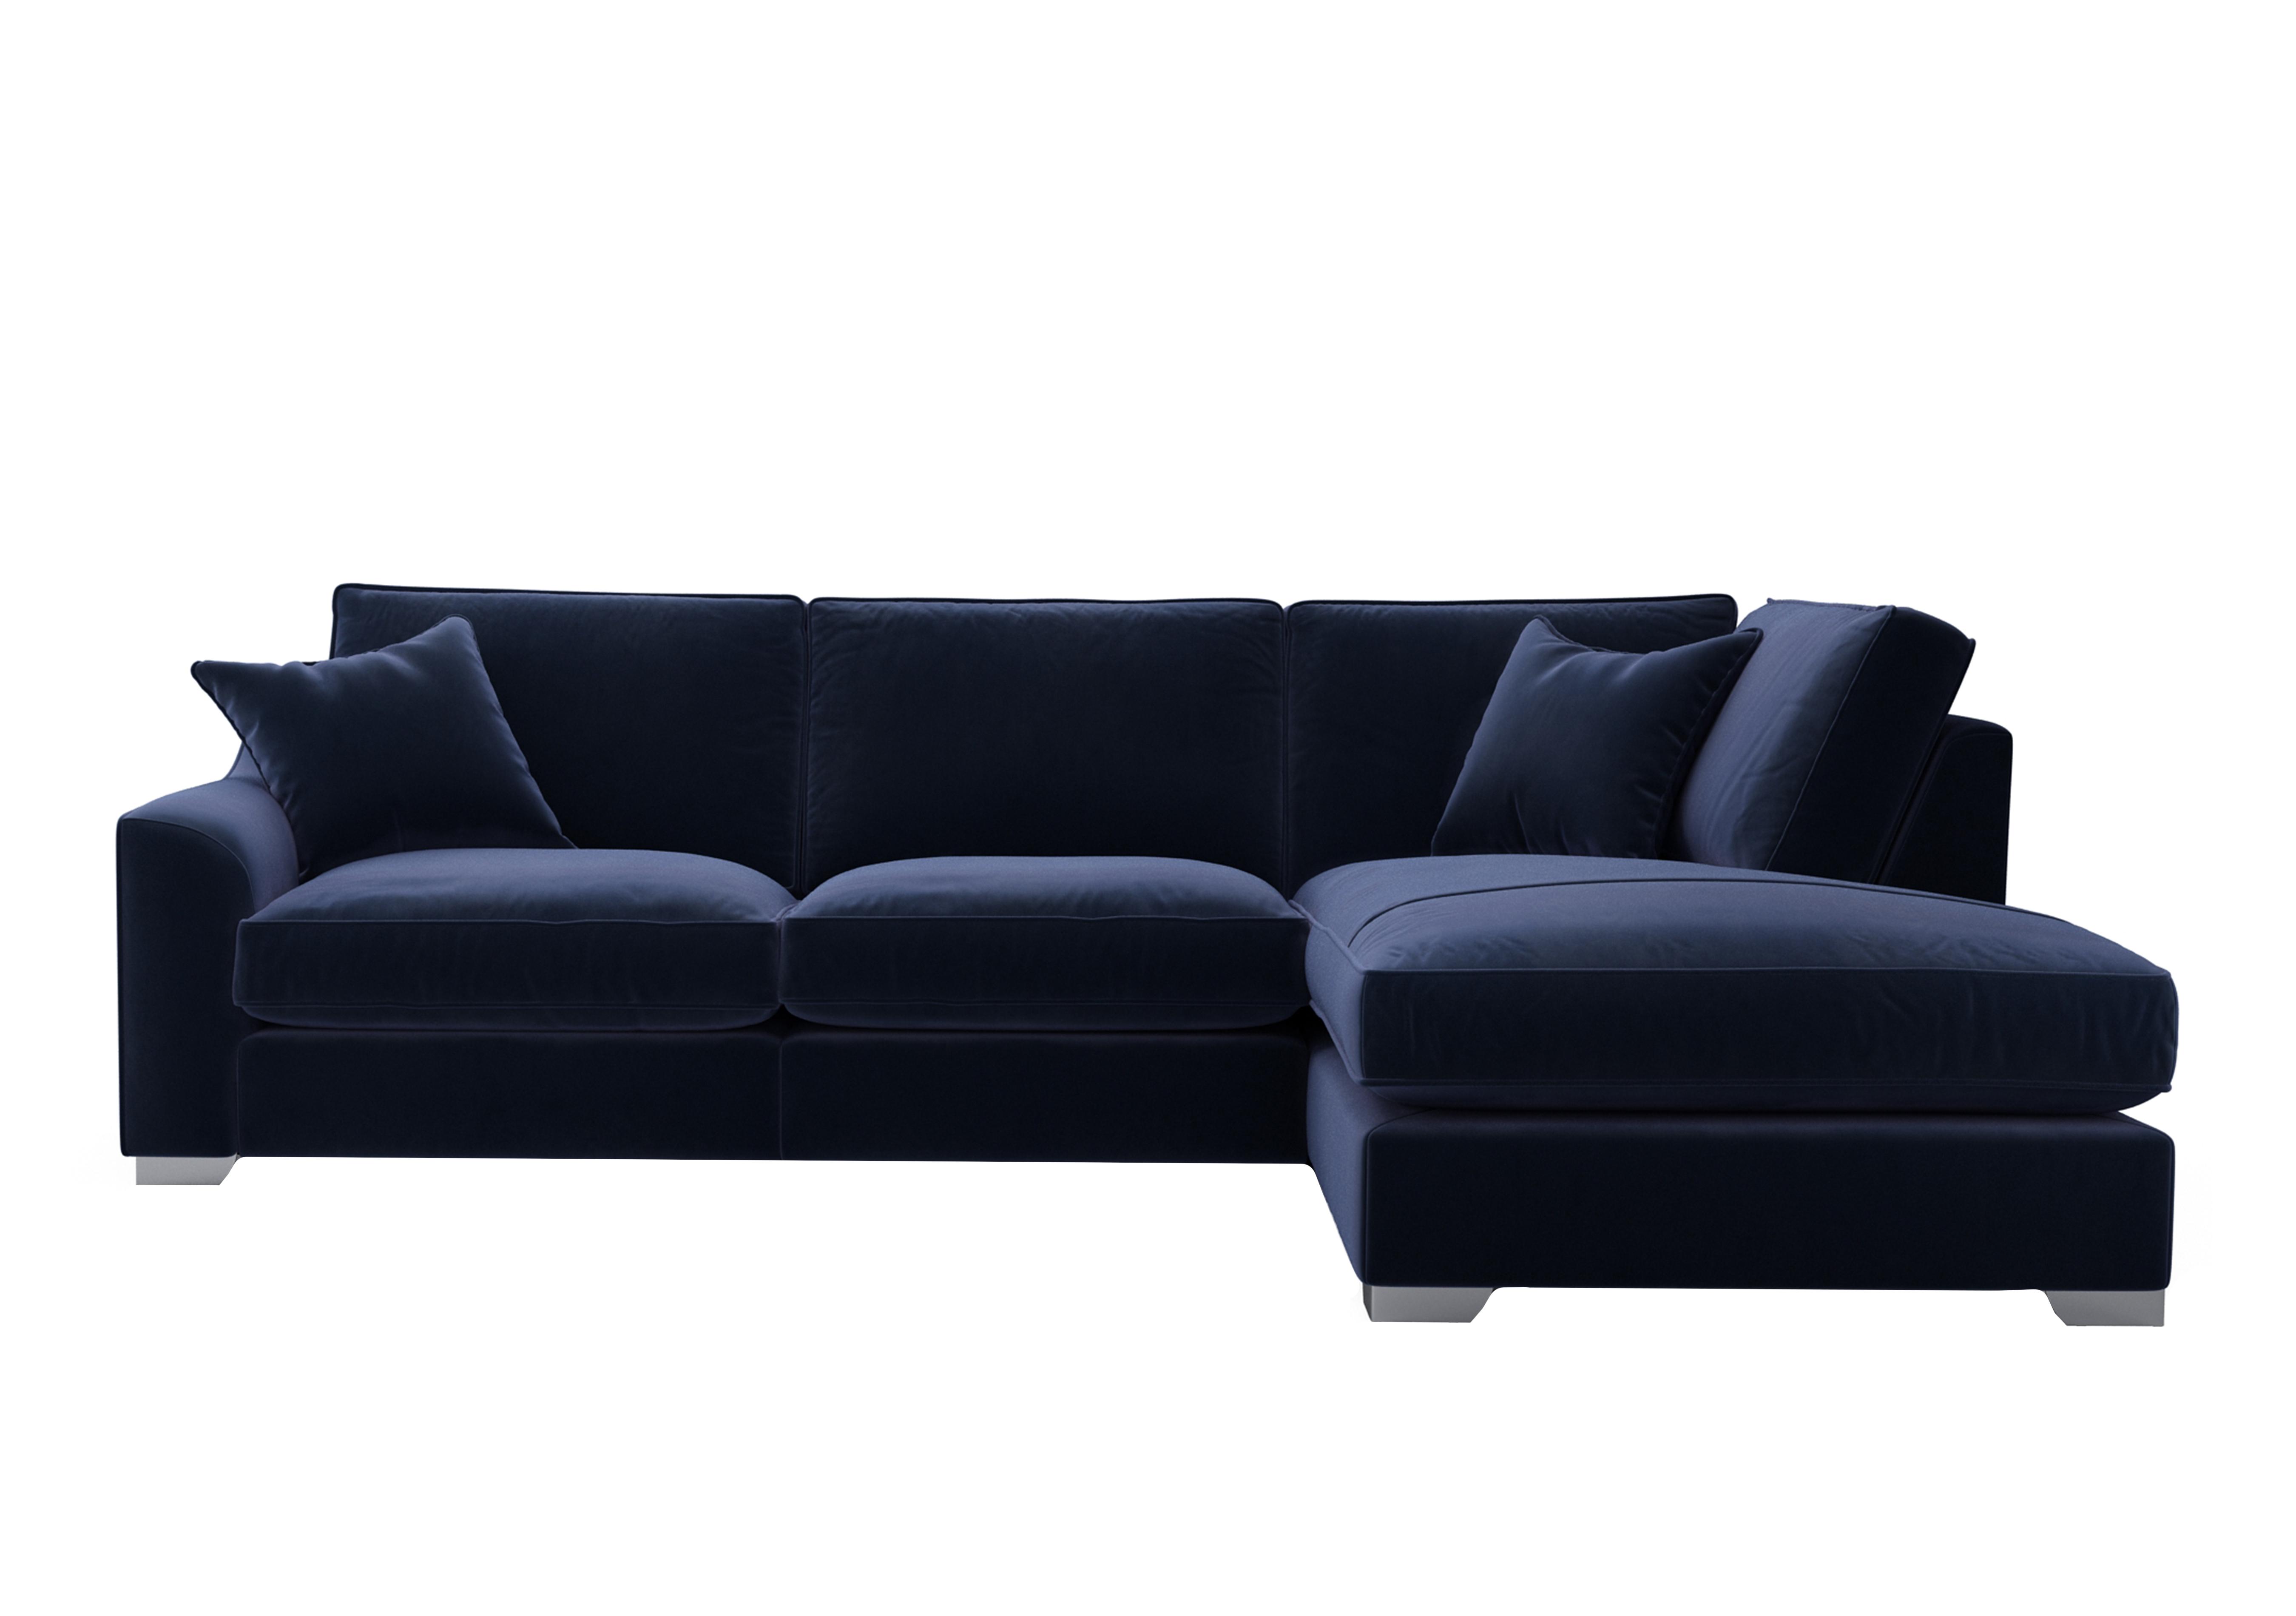 Isobel Fabric Corner Sofa with Chaise End in Mid009 Midnight Indigo Ch Ft on Furniture Village